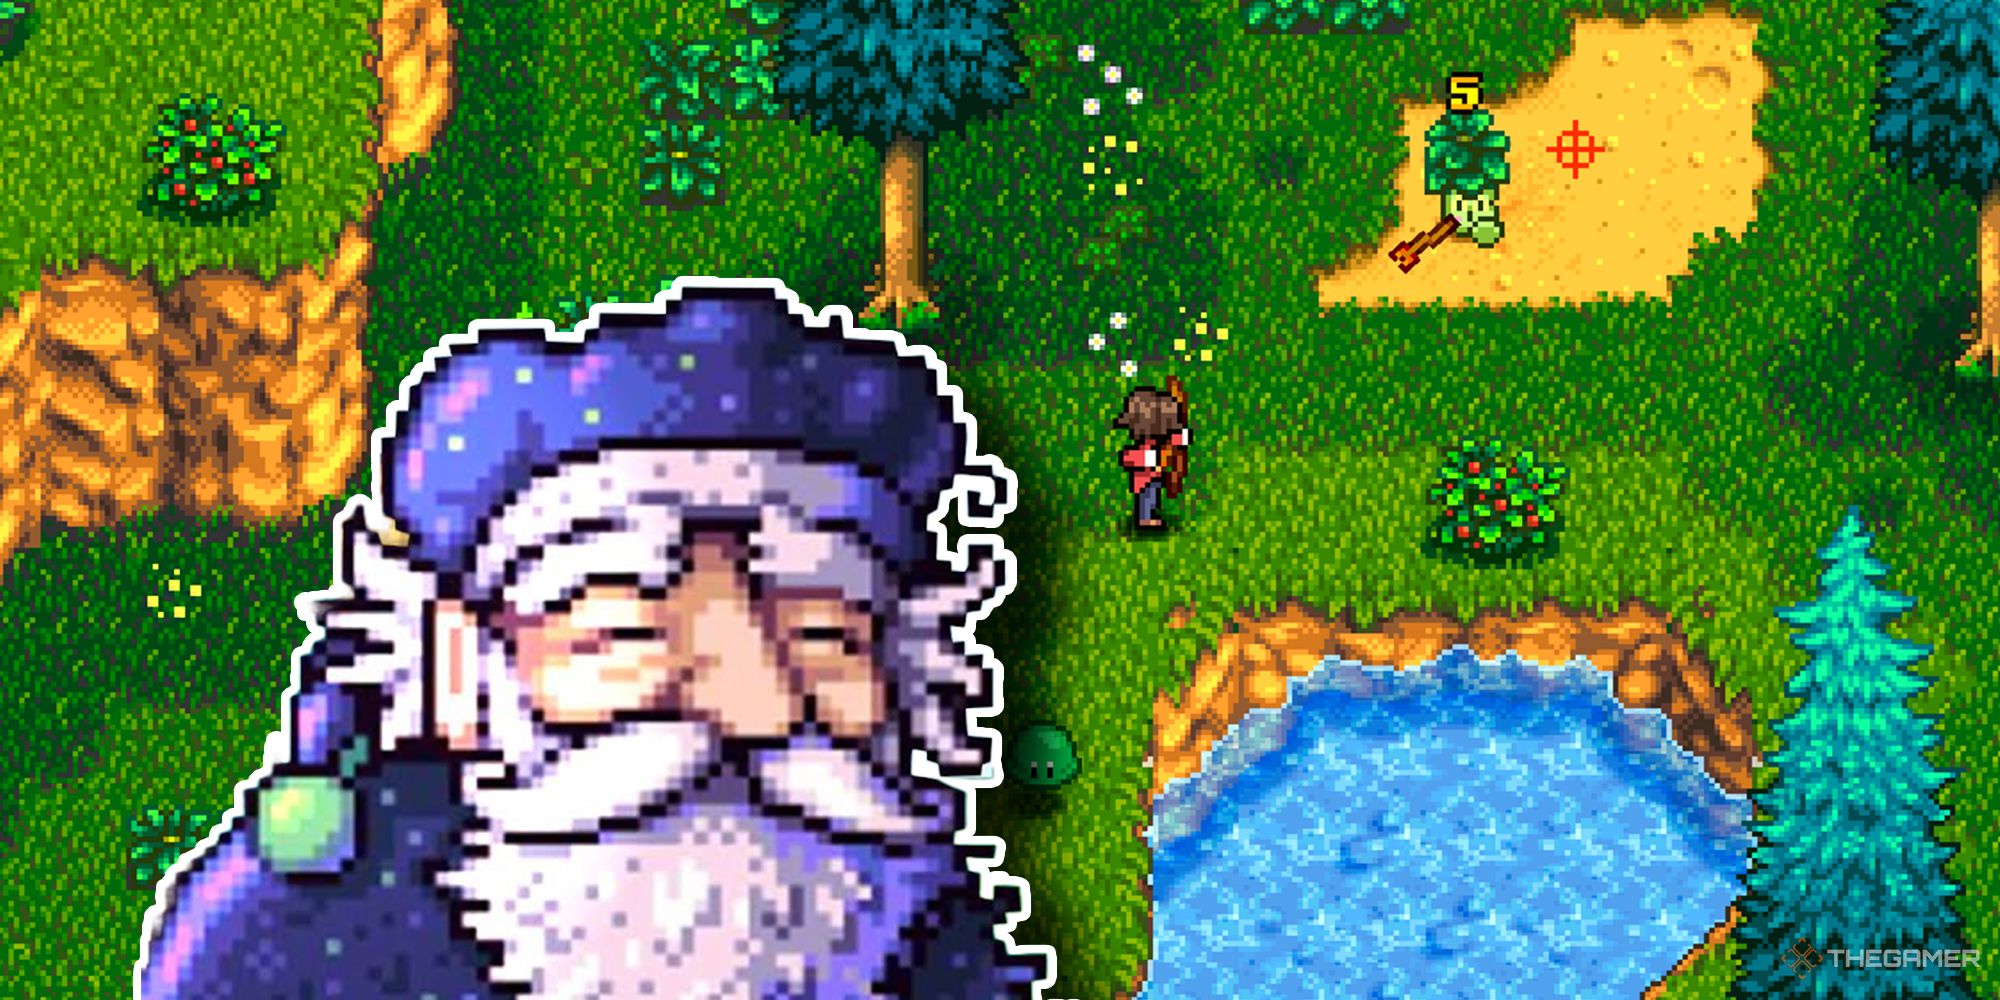 Stardew Valley in the background with an unnamed character from Haunted Chocolatier. The character wears a purple cap and robe, and has a long white beard and moustache